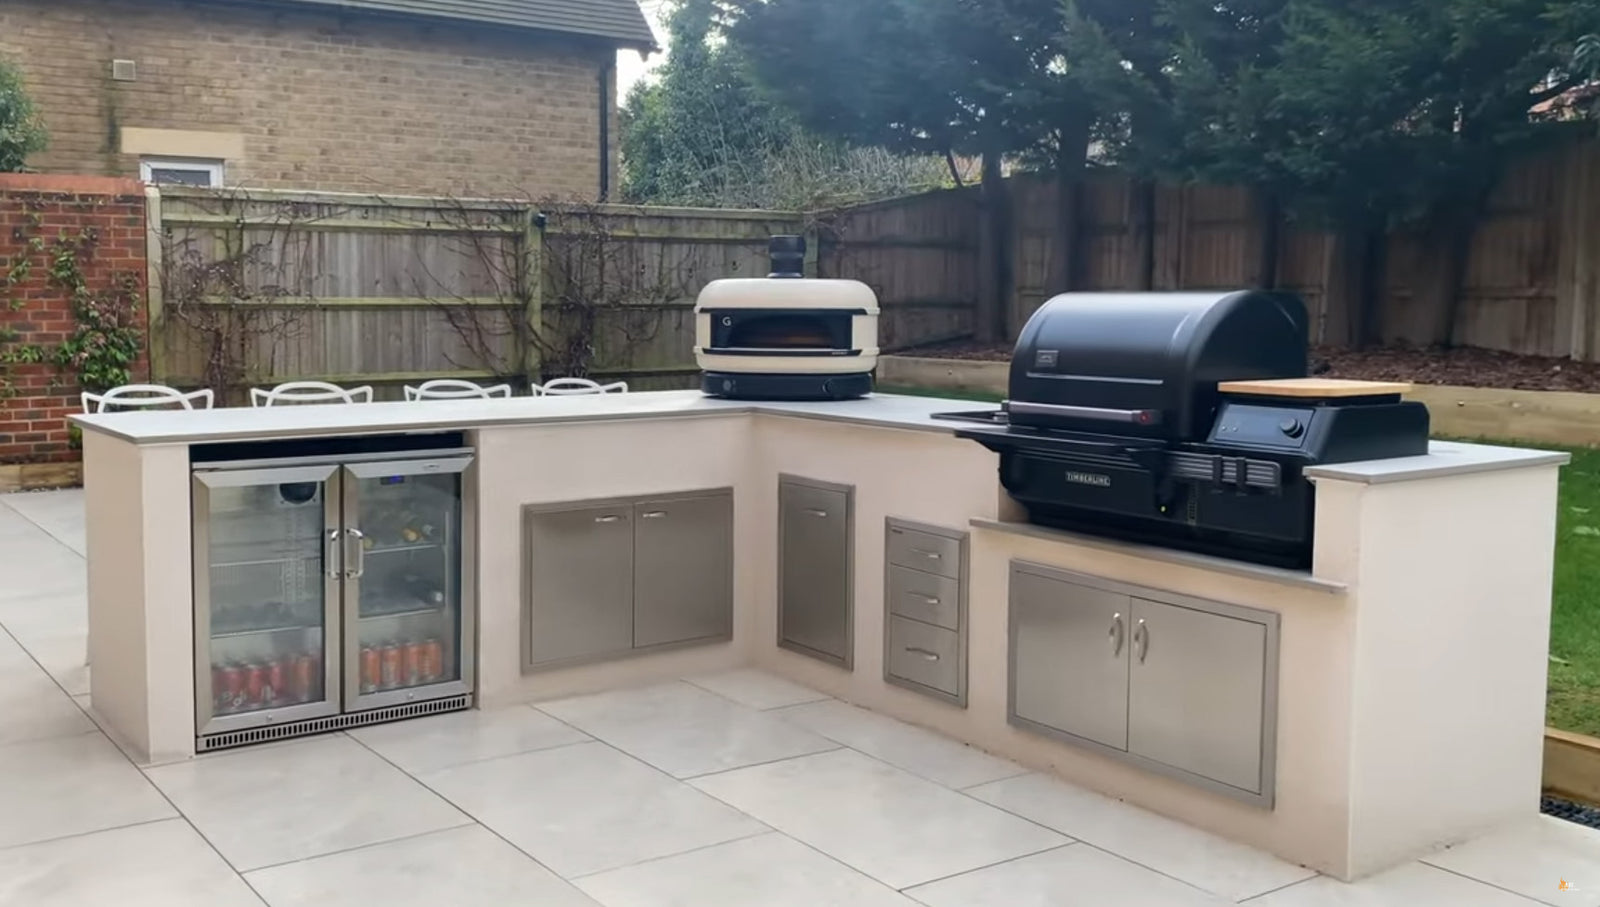 built in Traeger Wood pellet Grill in to outdoor kitchen